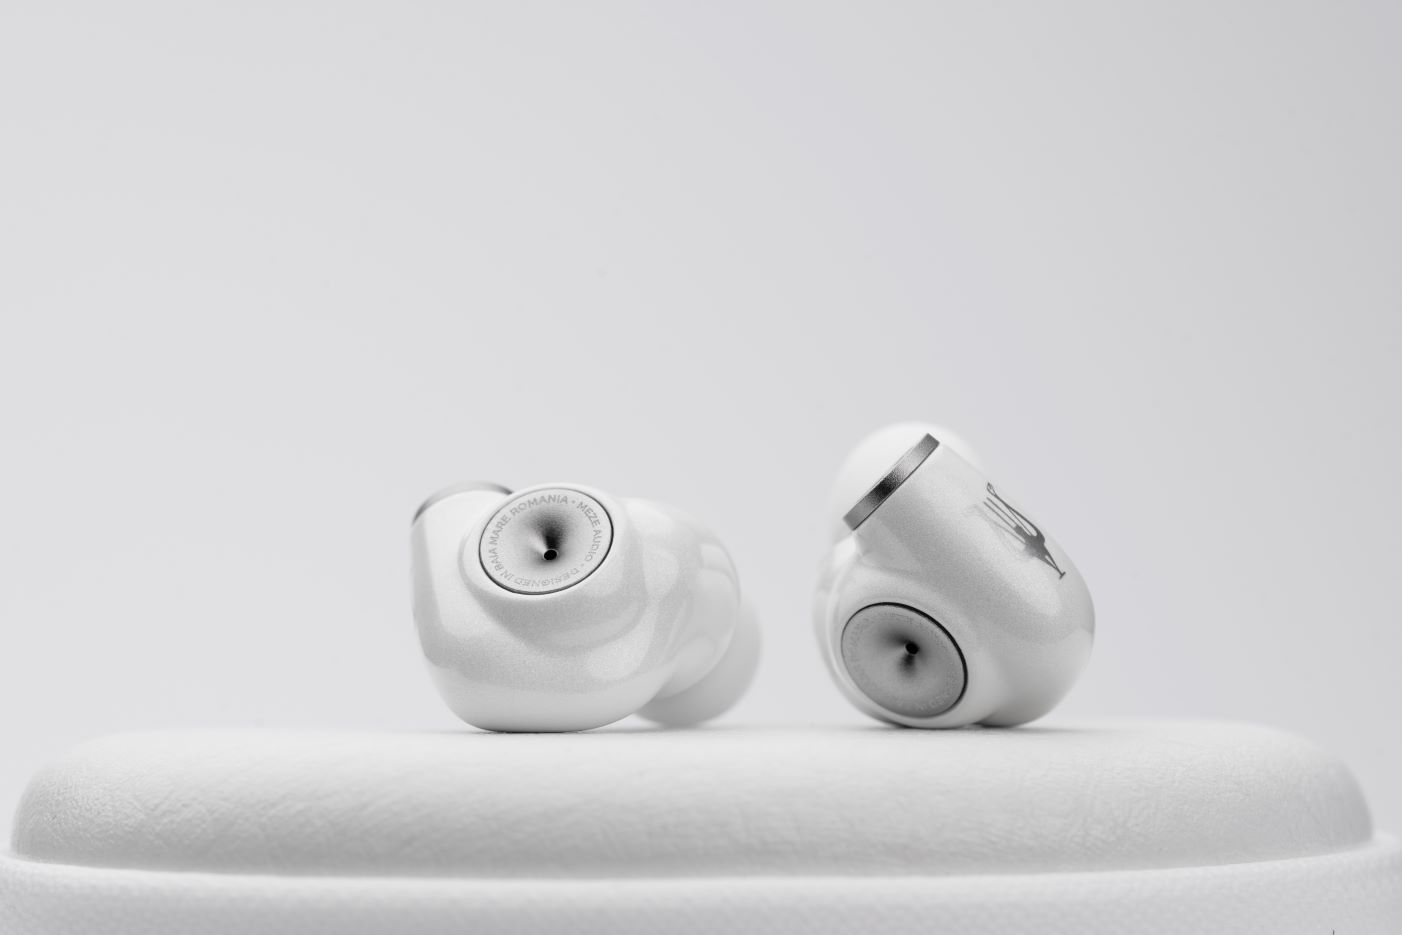 Meze Audio Introduces ALBA: A New Entry-Level In-Ear Headphone